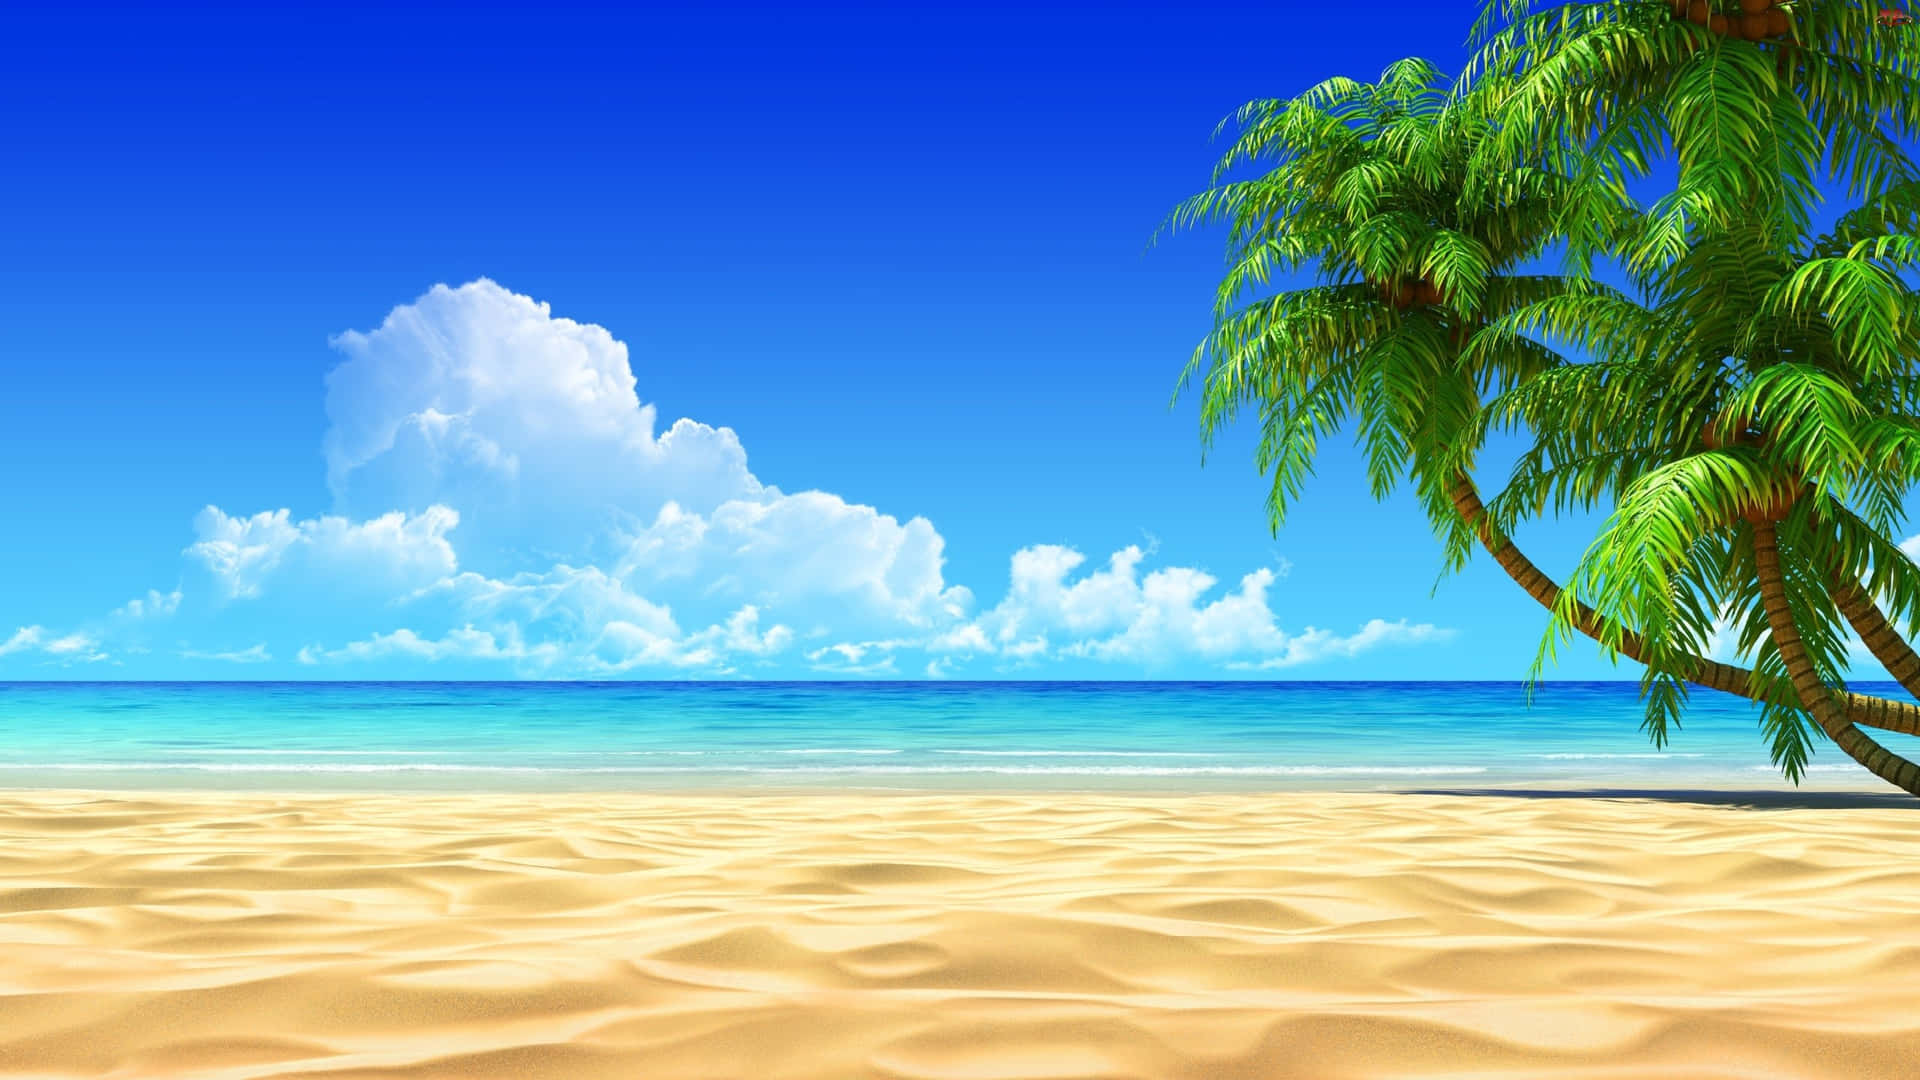 An unforgettable vacation awaits you at the picture-perfect Ocean Beach Wallpaper